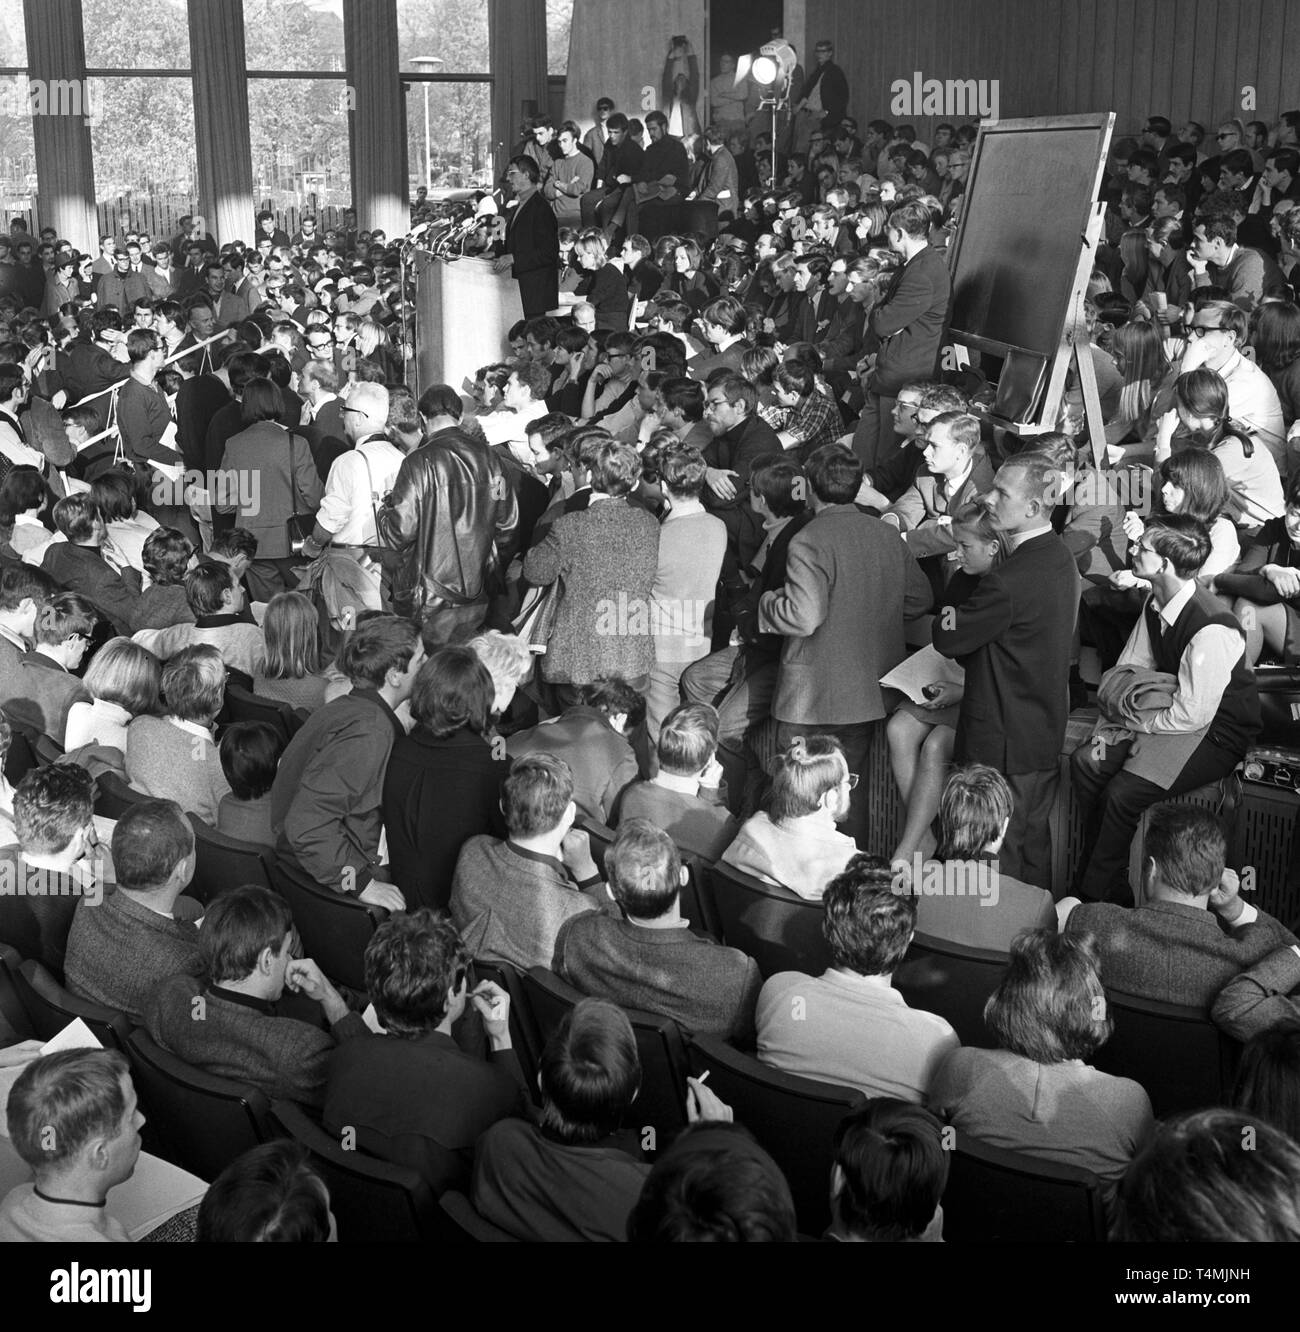 About 2,000 students have gathered in the overcrowded Auditorium Maximum for the inaugural meeting of the Kritische Universität (KU), translates as Critical University (initiated by the AStA of Free University Berlin), on 01 November 1967, to decide on aims and forms of organisation of the Critical University. | usage worldwide Stock Photo